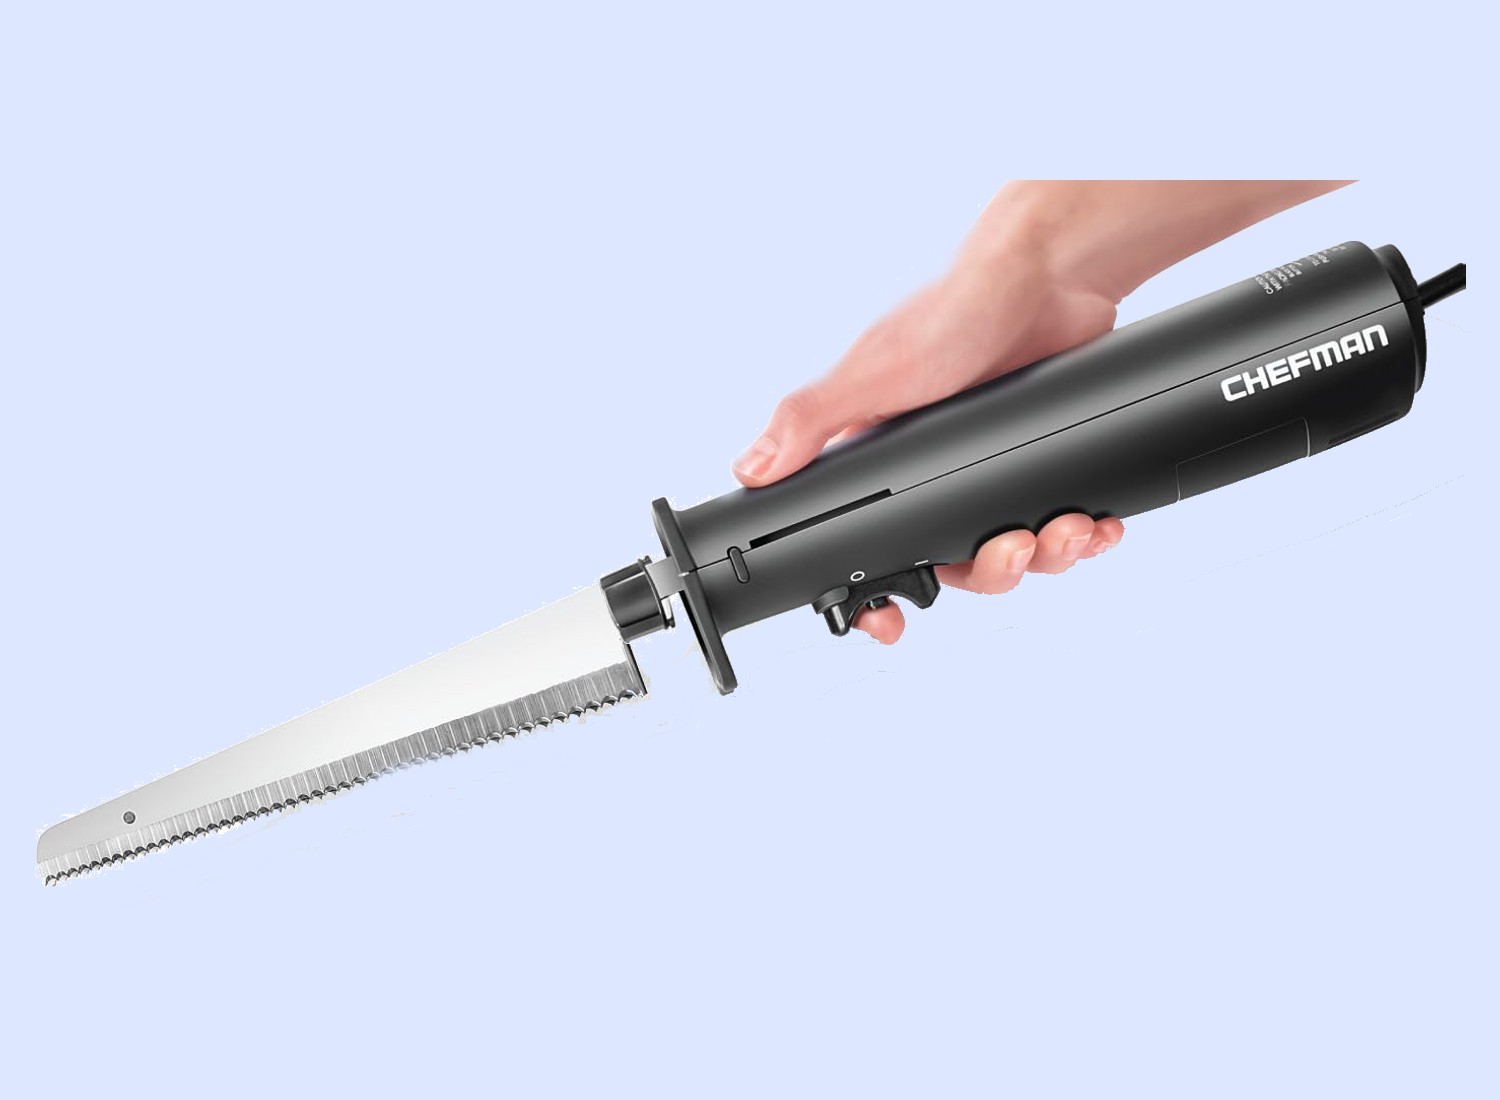 The 7 Best Electric Knives of 2023